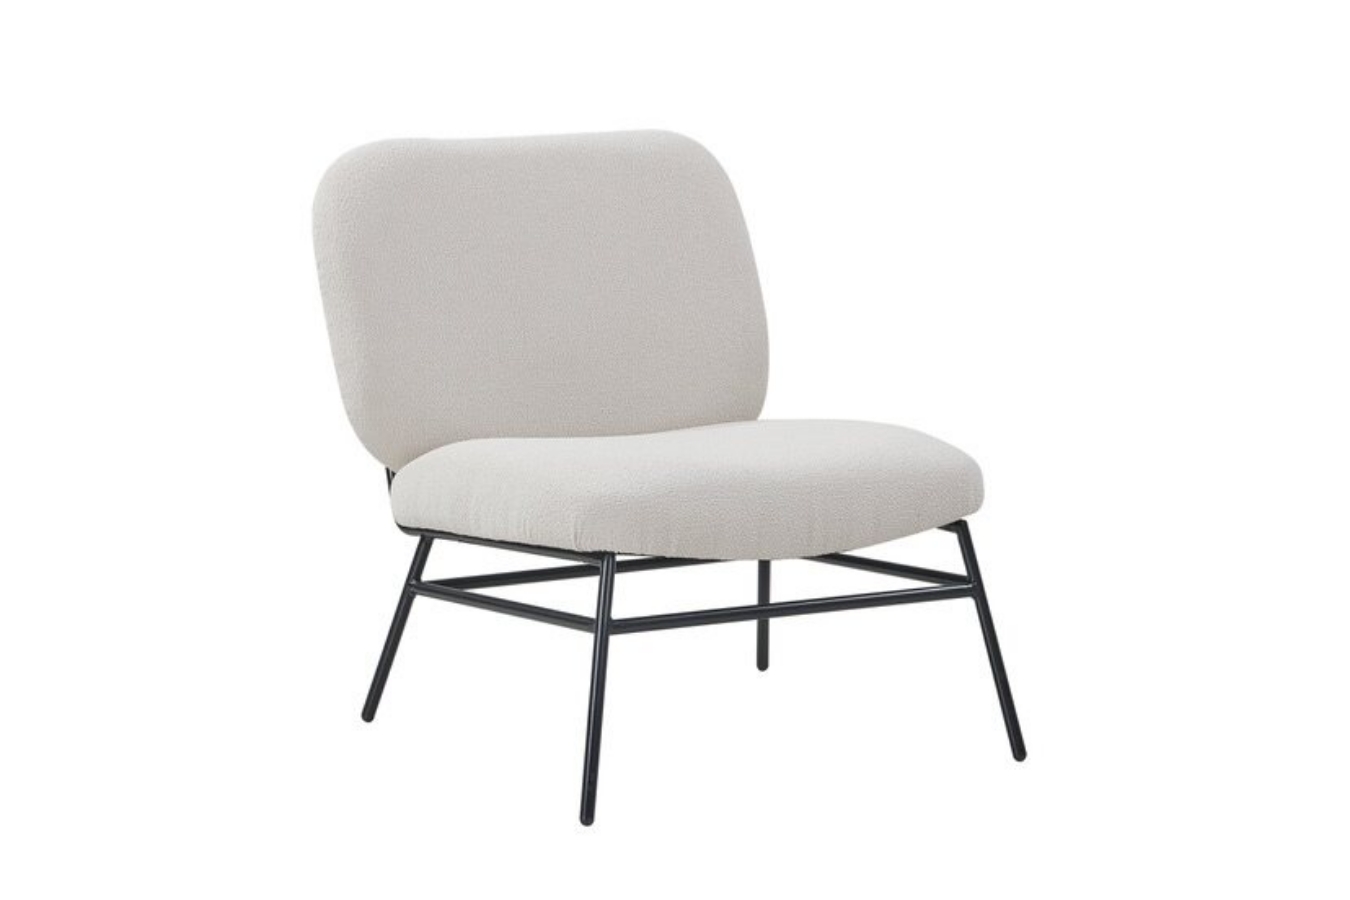 Ruby chair gives you a luxurious vibe and unique spin on the modern accent chair. 